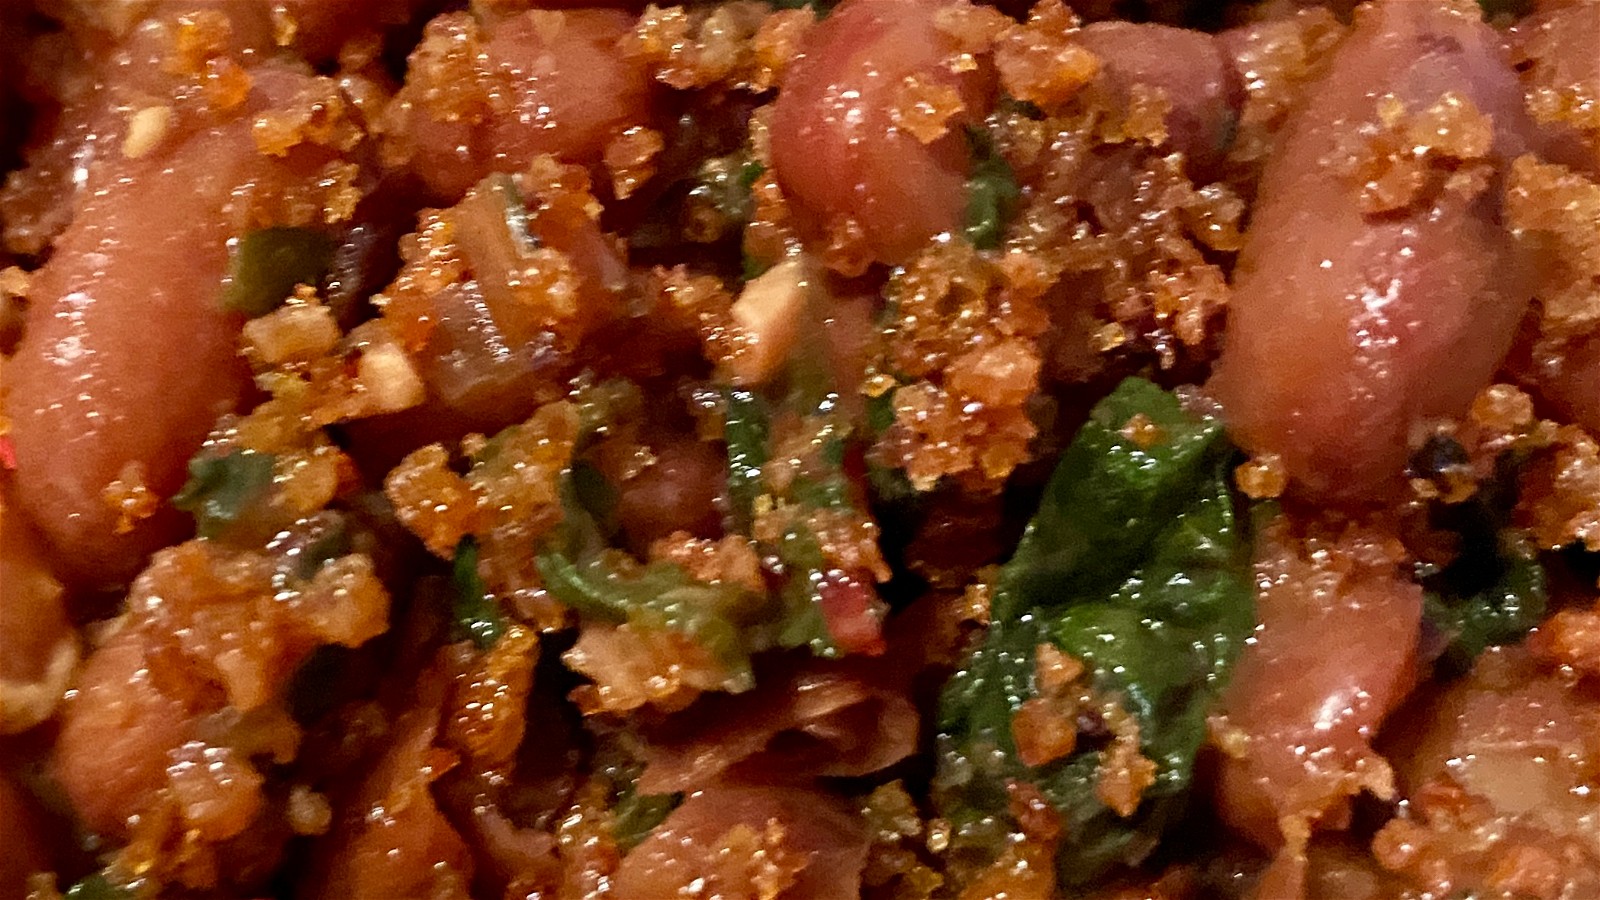 Image of Beans and Chard with Toasted Bread Crumbs